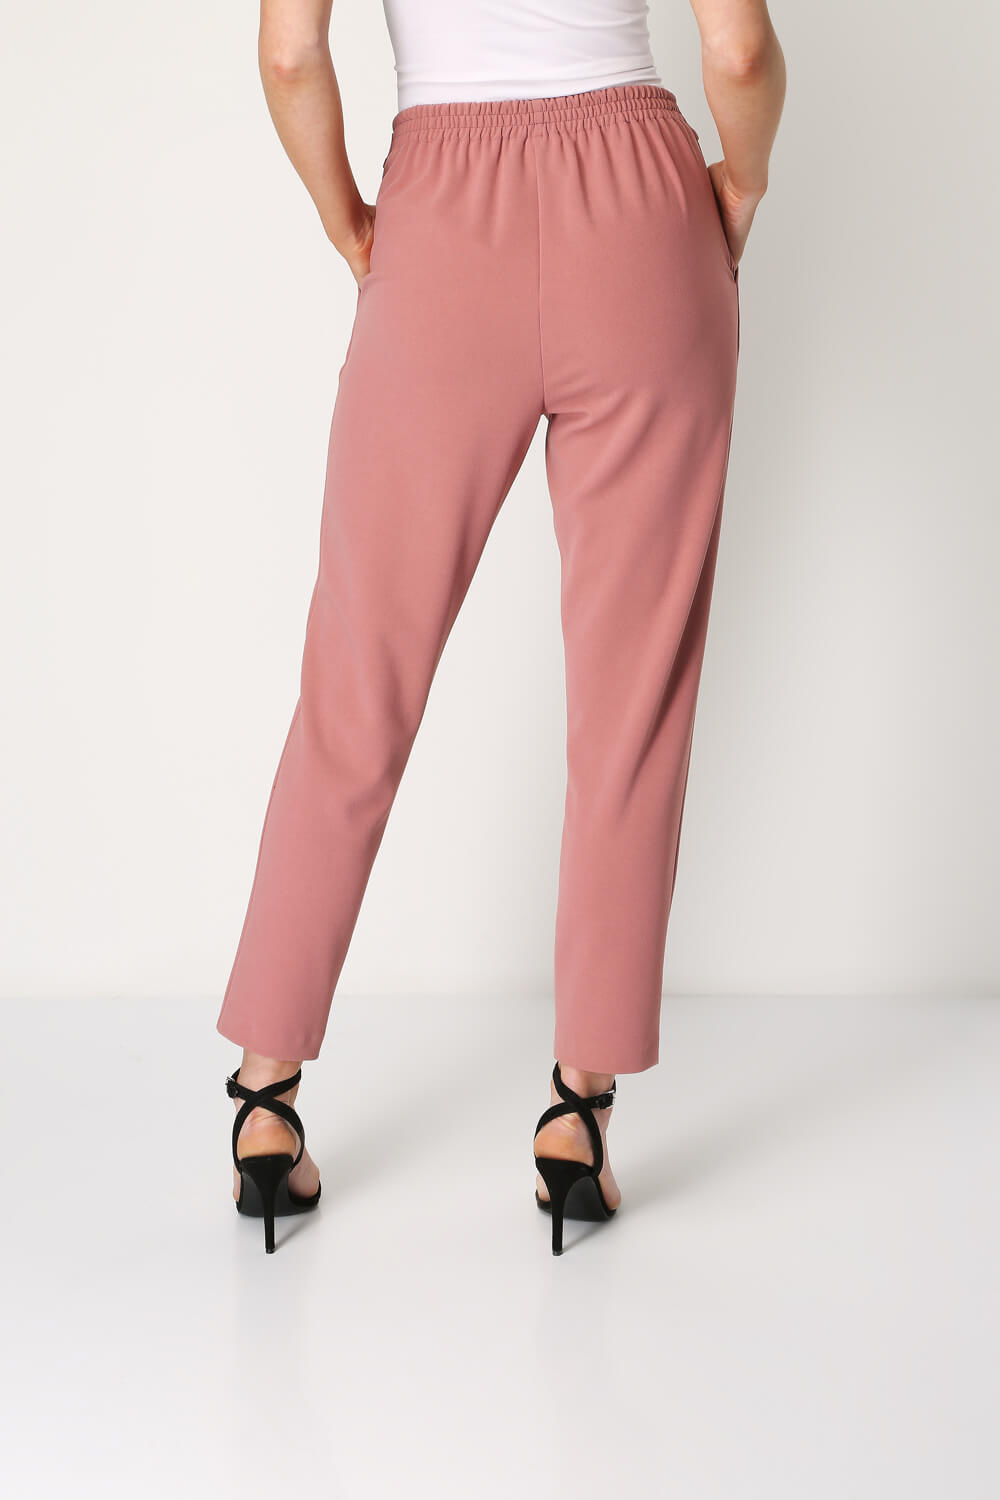 PINK Belted Tailored Trousers , Image 3 of 5